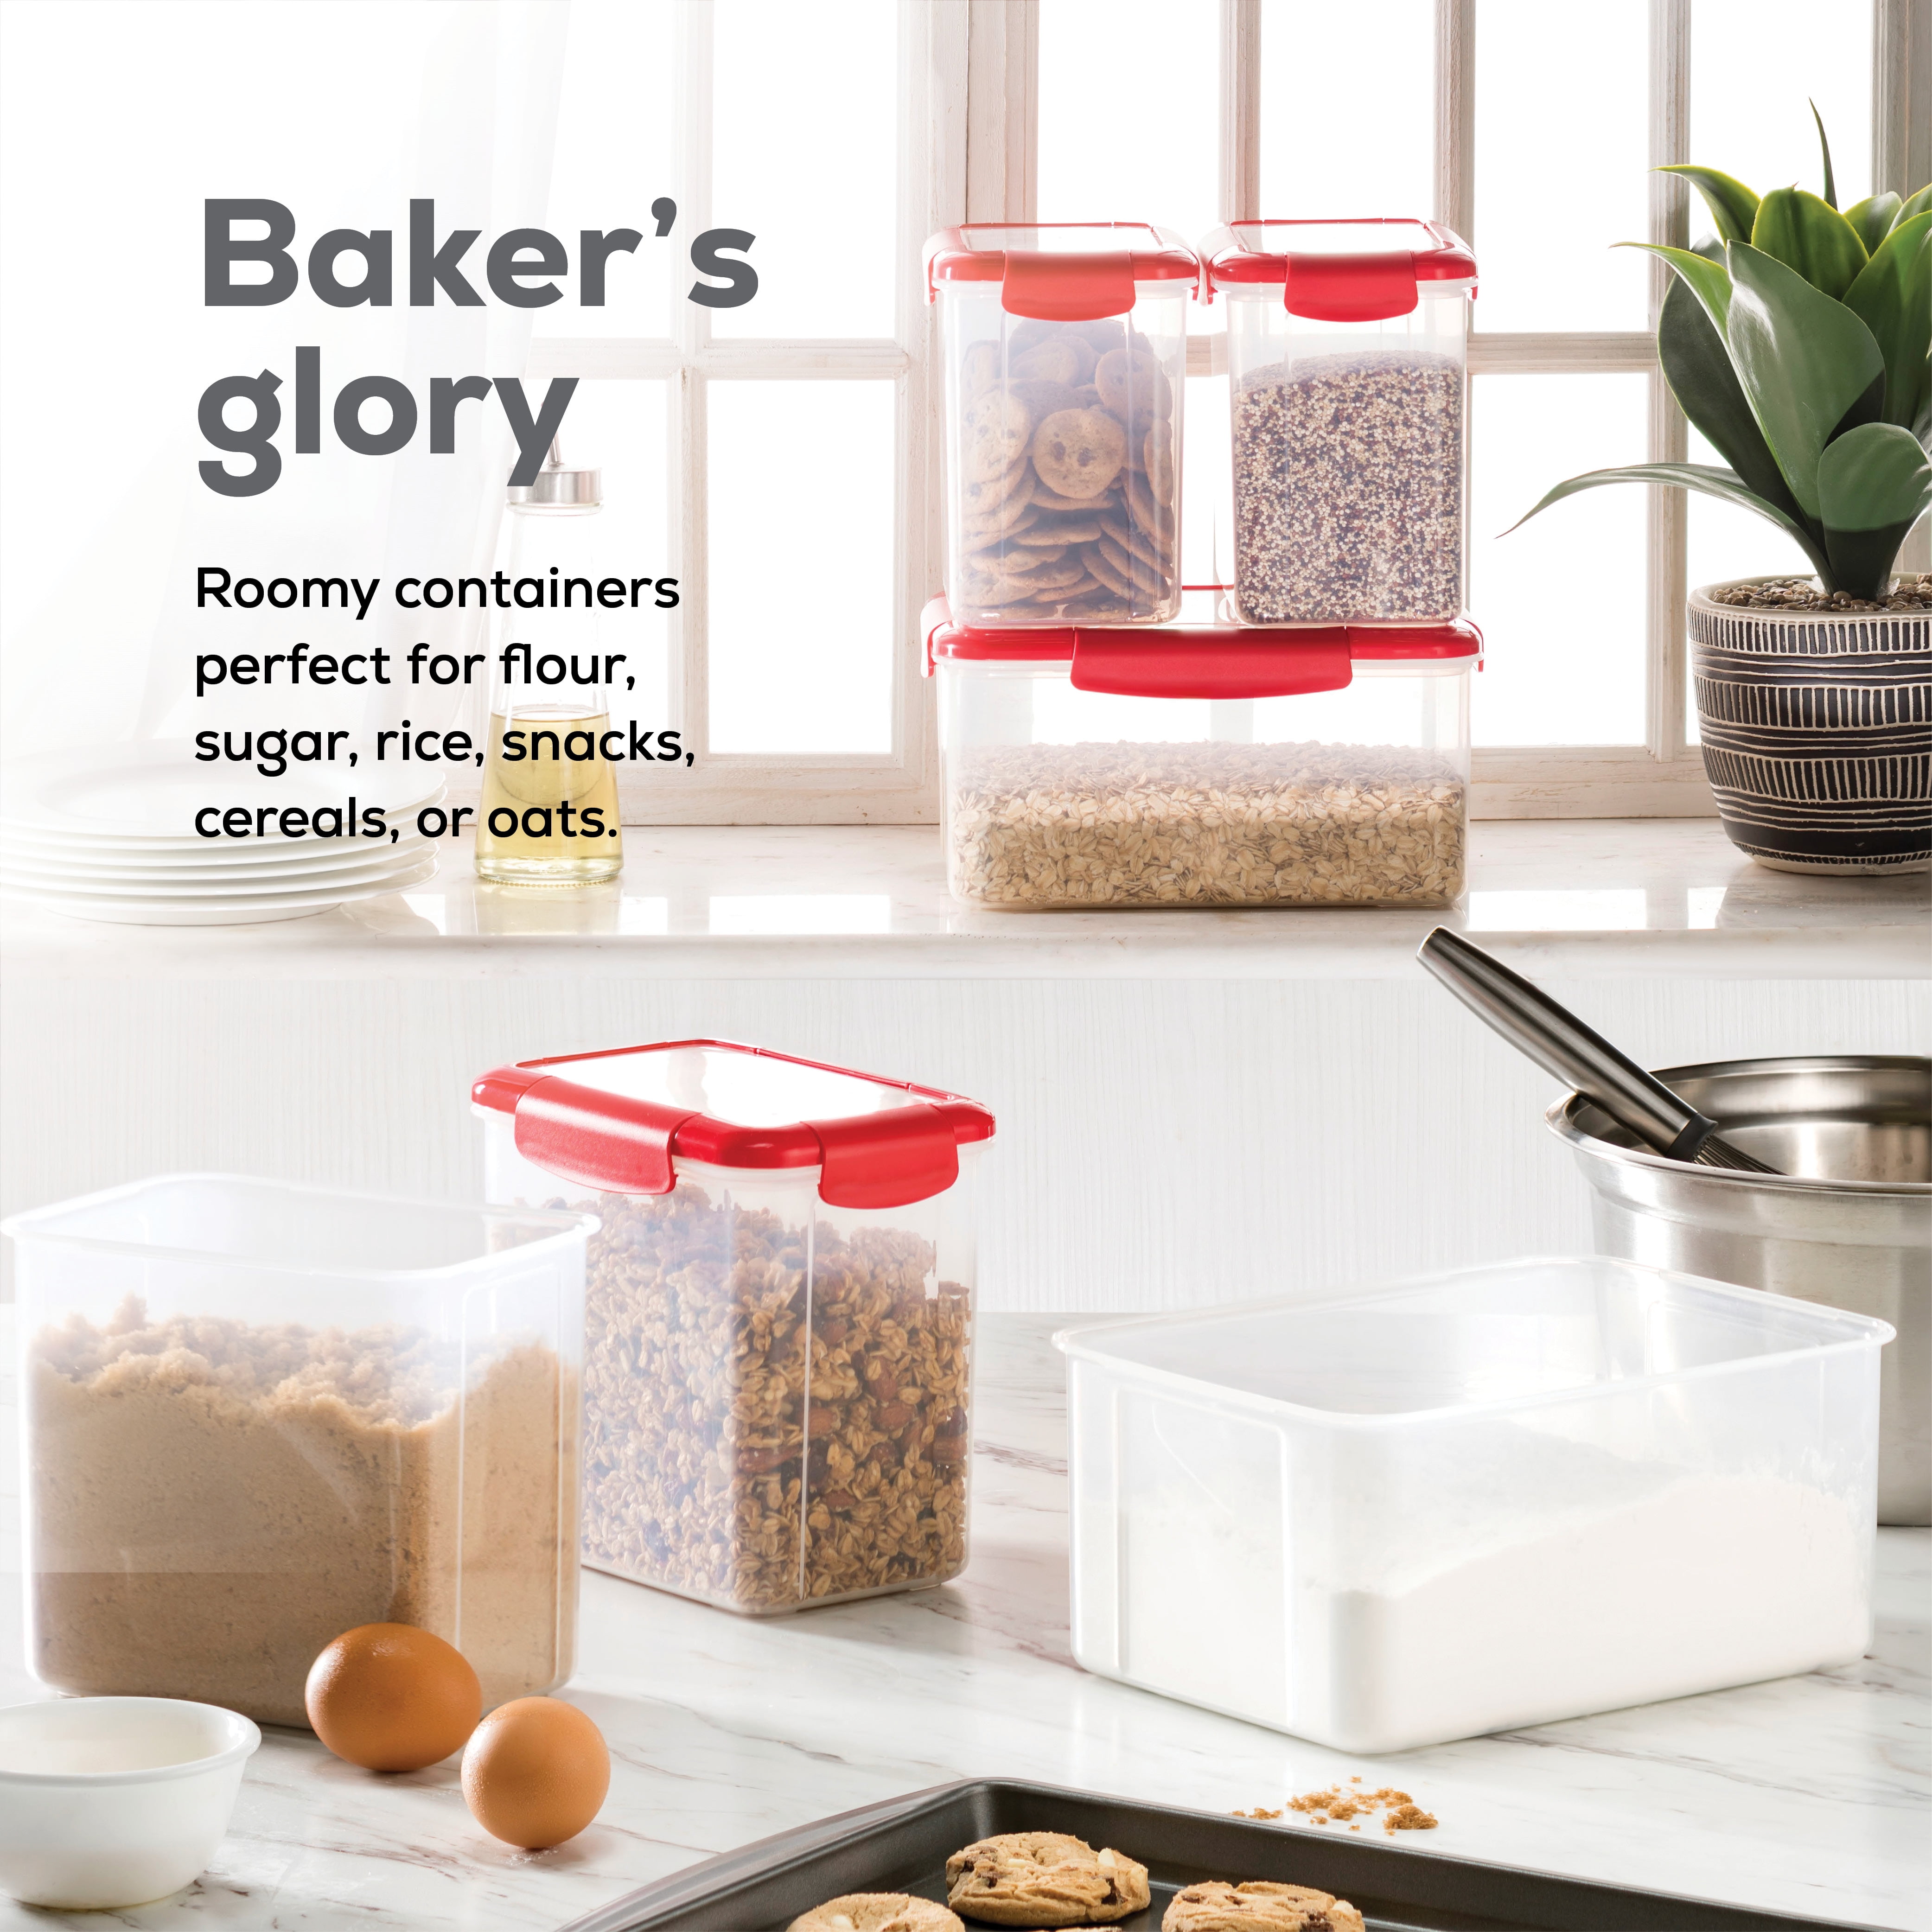 Airtight Food Storage Containers for Pantry Organization and Storage (12 PC  Set) - BPA Free Baking Storage Containers Set- Kitchen Bulk Food Canisters